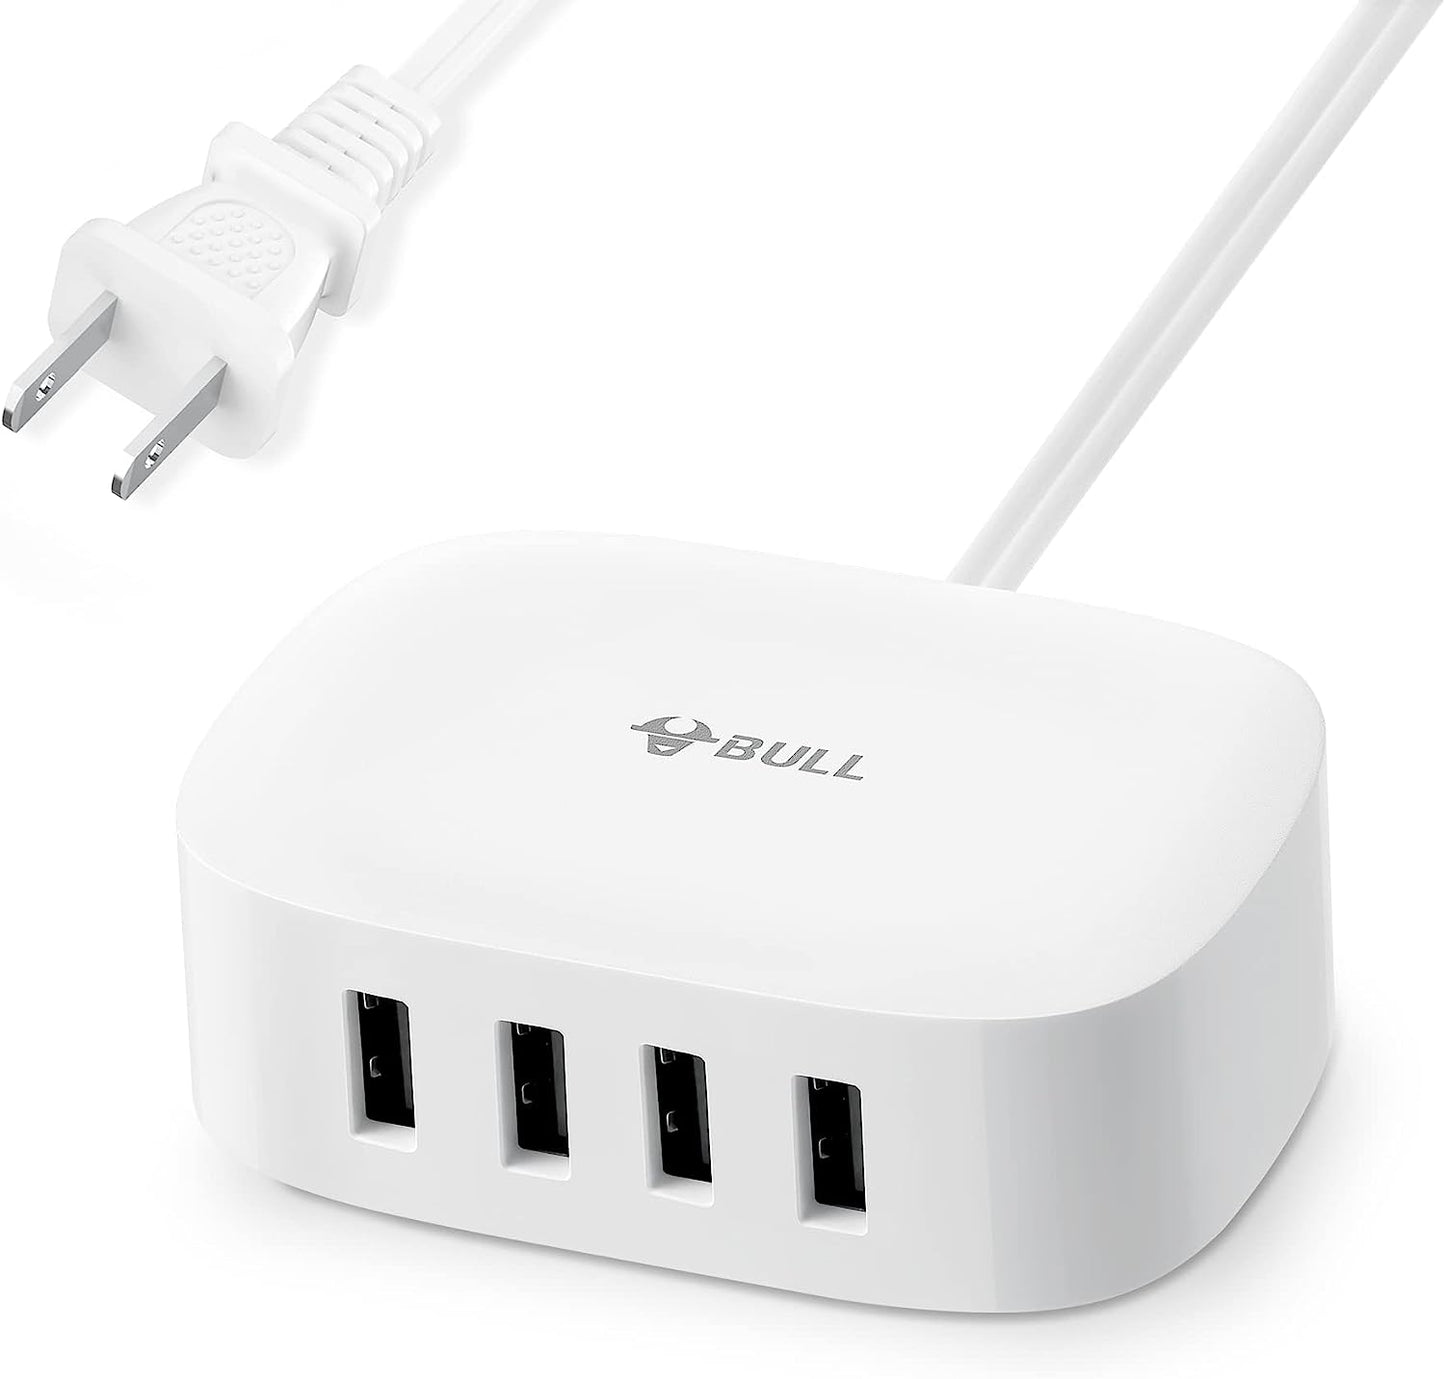 GONEO USB Charging Station - 4 Port USB Charging Station for Multiple Devices, 25W Multi USB Charger Station Apple iPhone, Tablet Laptop Computer, Travel, Home, Office (6Ft Extension Cord?